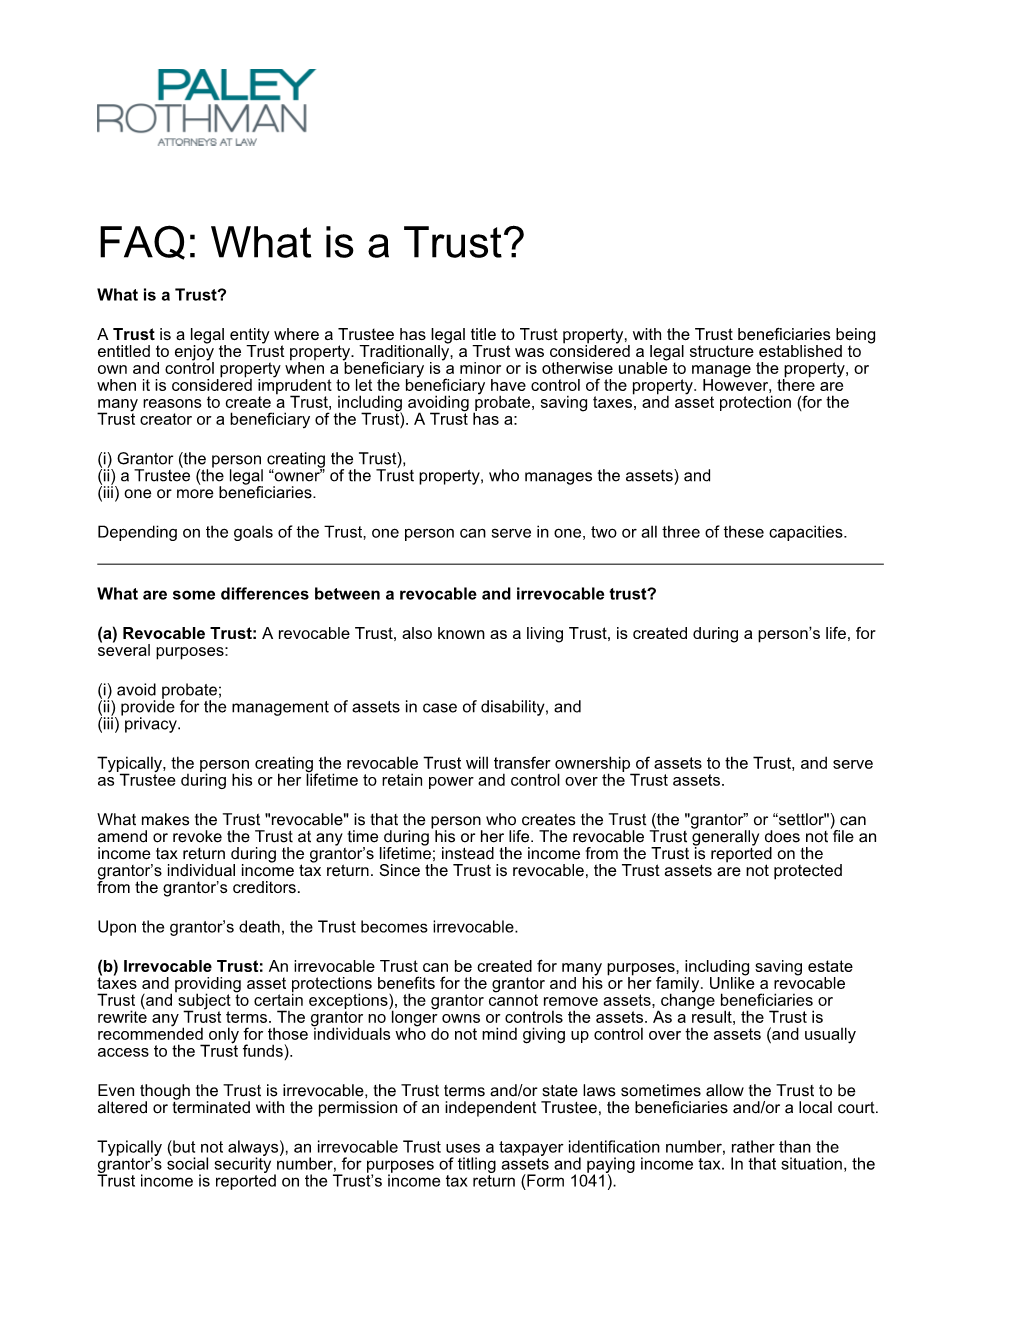 What Is a Trust? | Paley Rothman